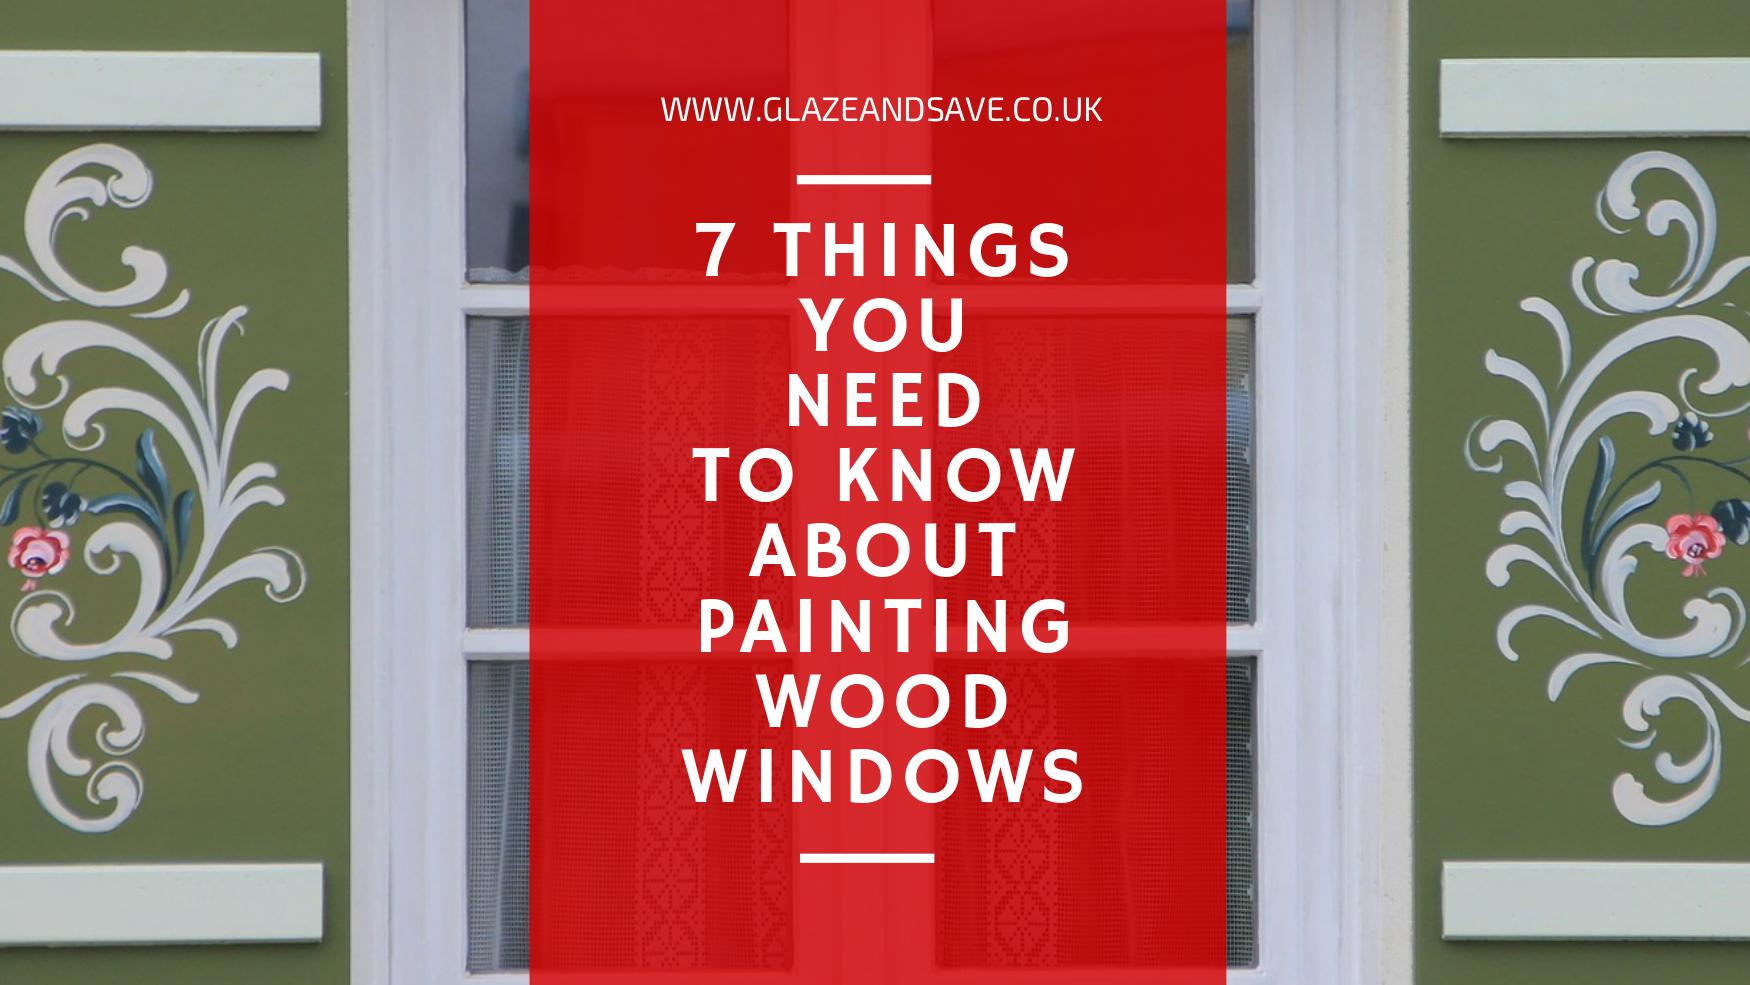 7 things you need to know about painting wood windows by Glaze & Save bespoke magnetic secondary glazing and draught proofing specialists in Perth and serving the whole of Scotland